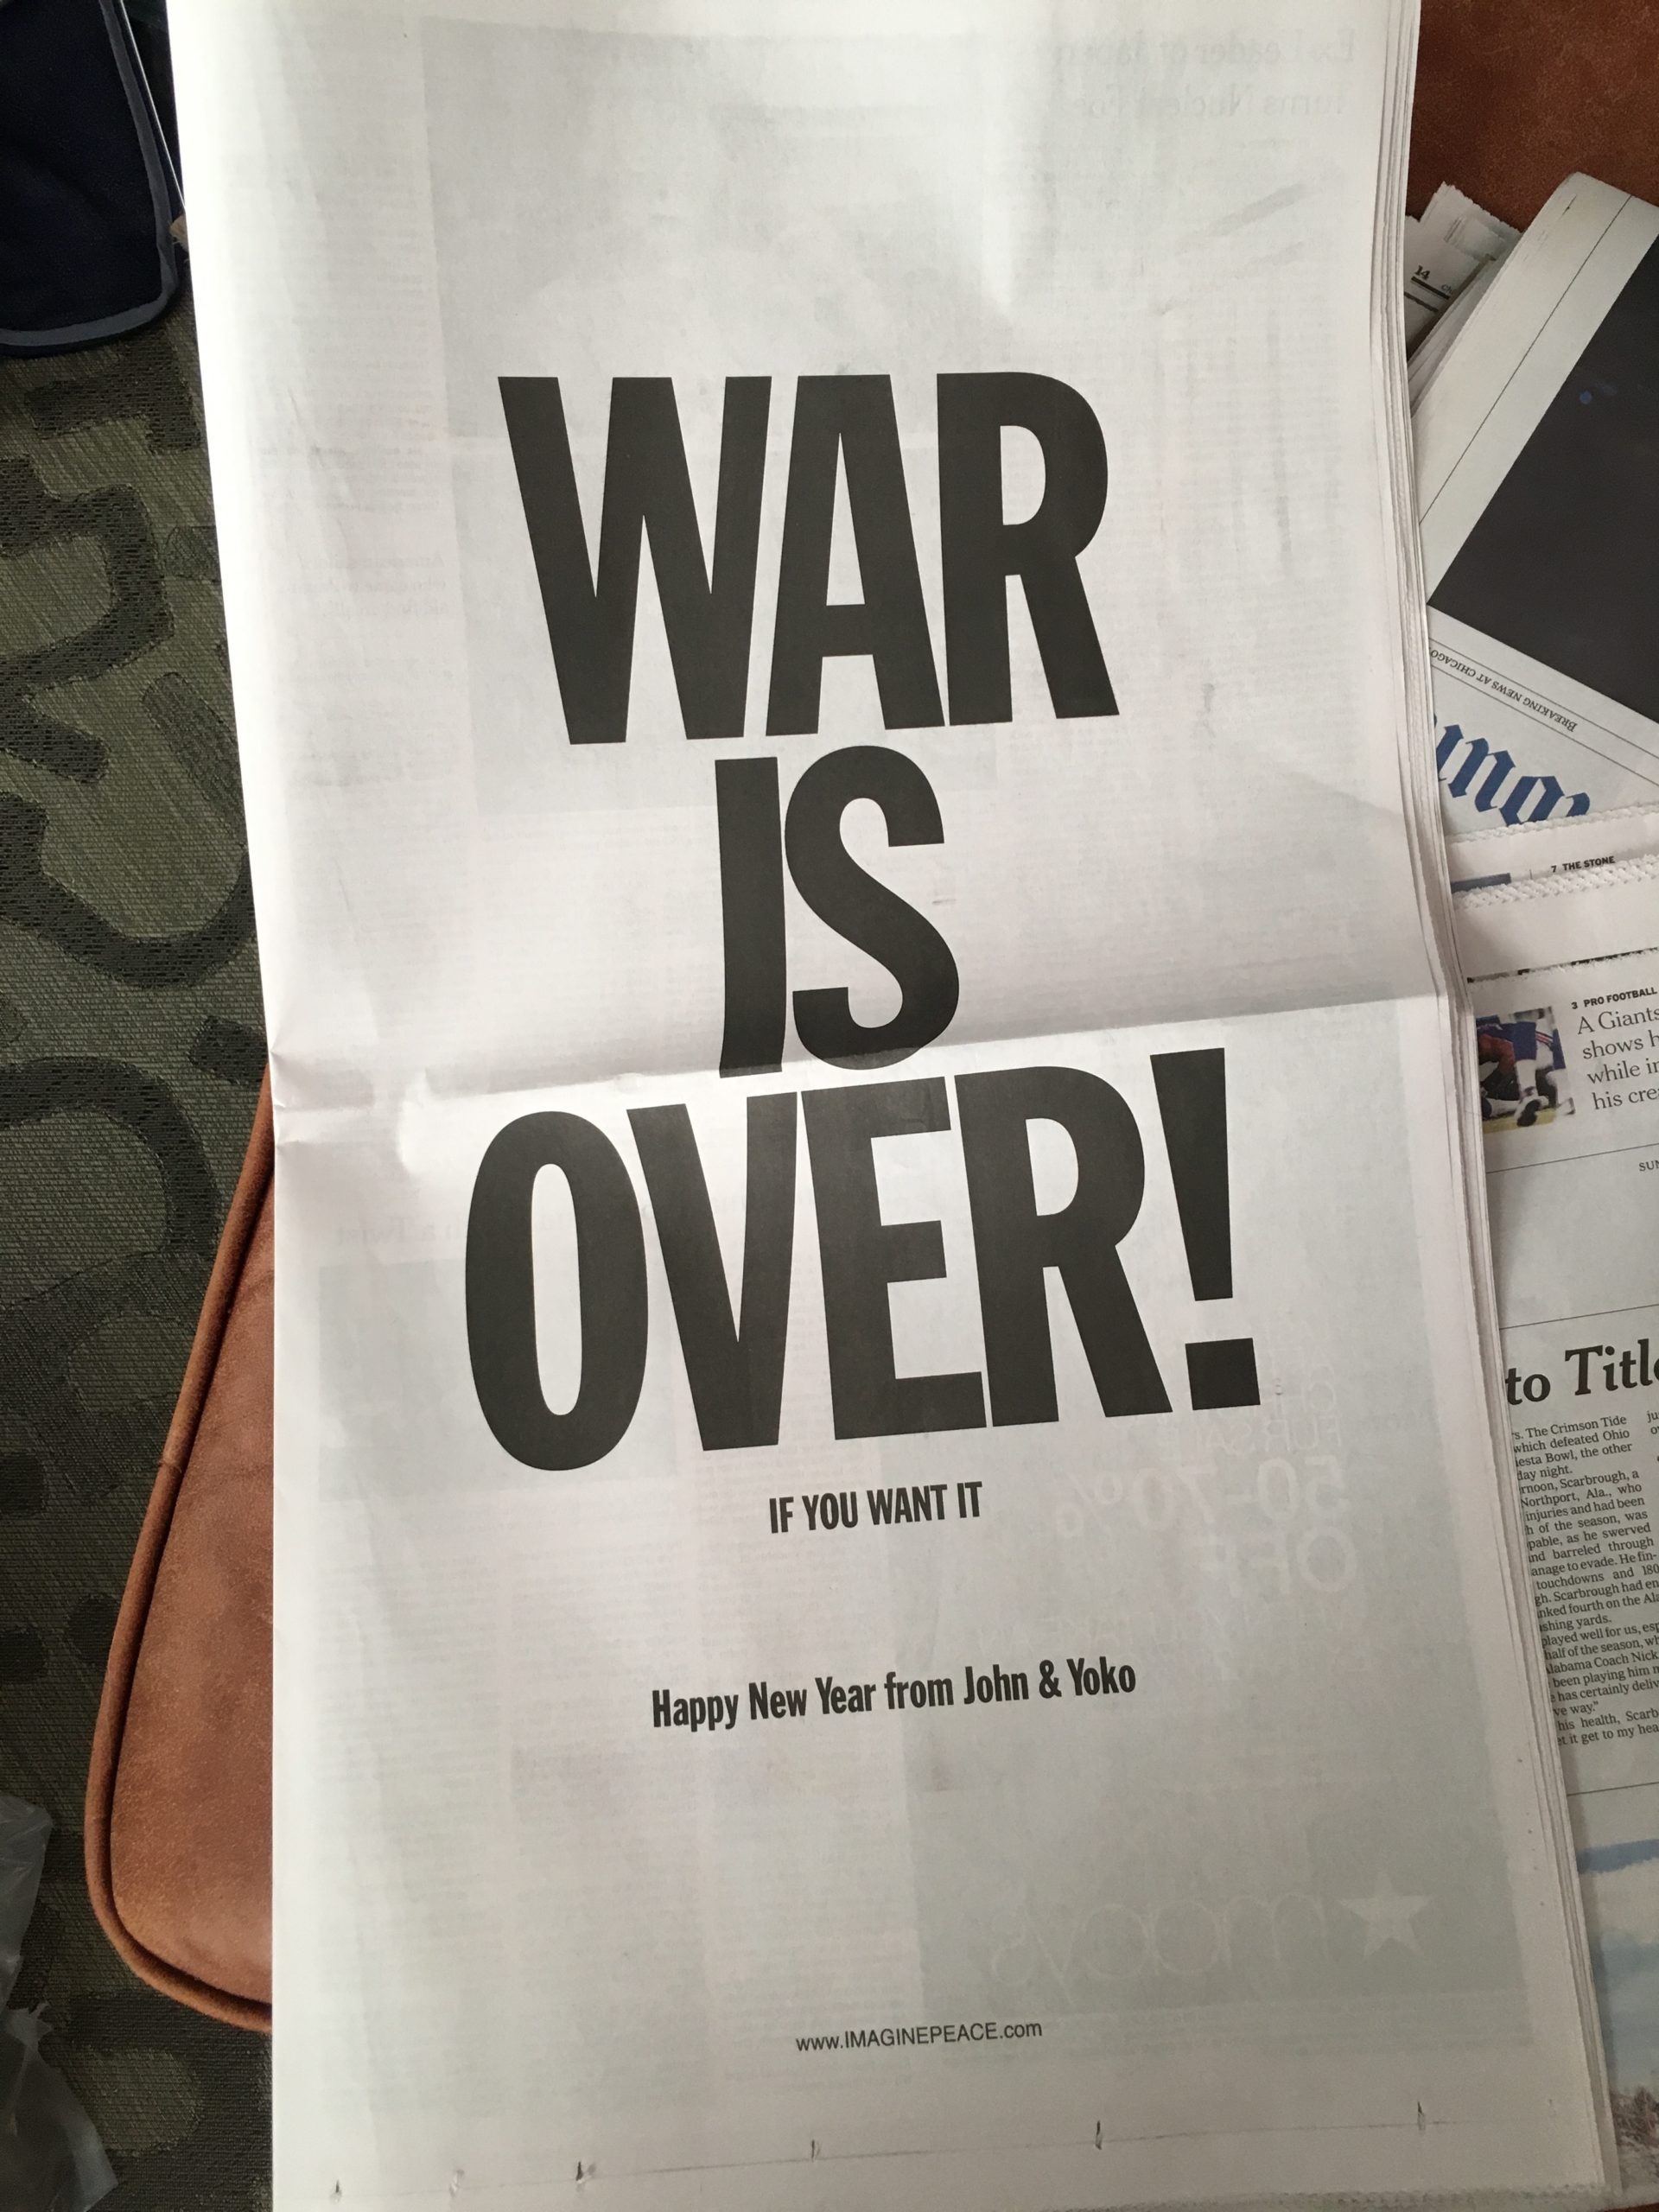 https://publicdelivery.org/wp-content/uploads/2021/06/War-Is-Over-Full-page-ad-Sunday-New-York-Times-January-1-2017-scaled.jpg